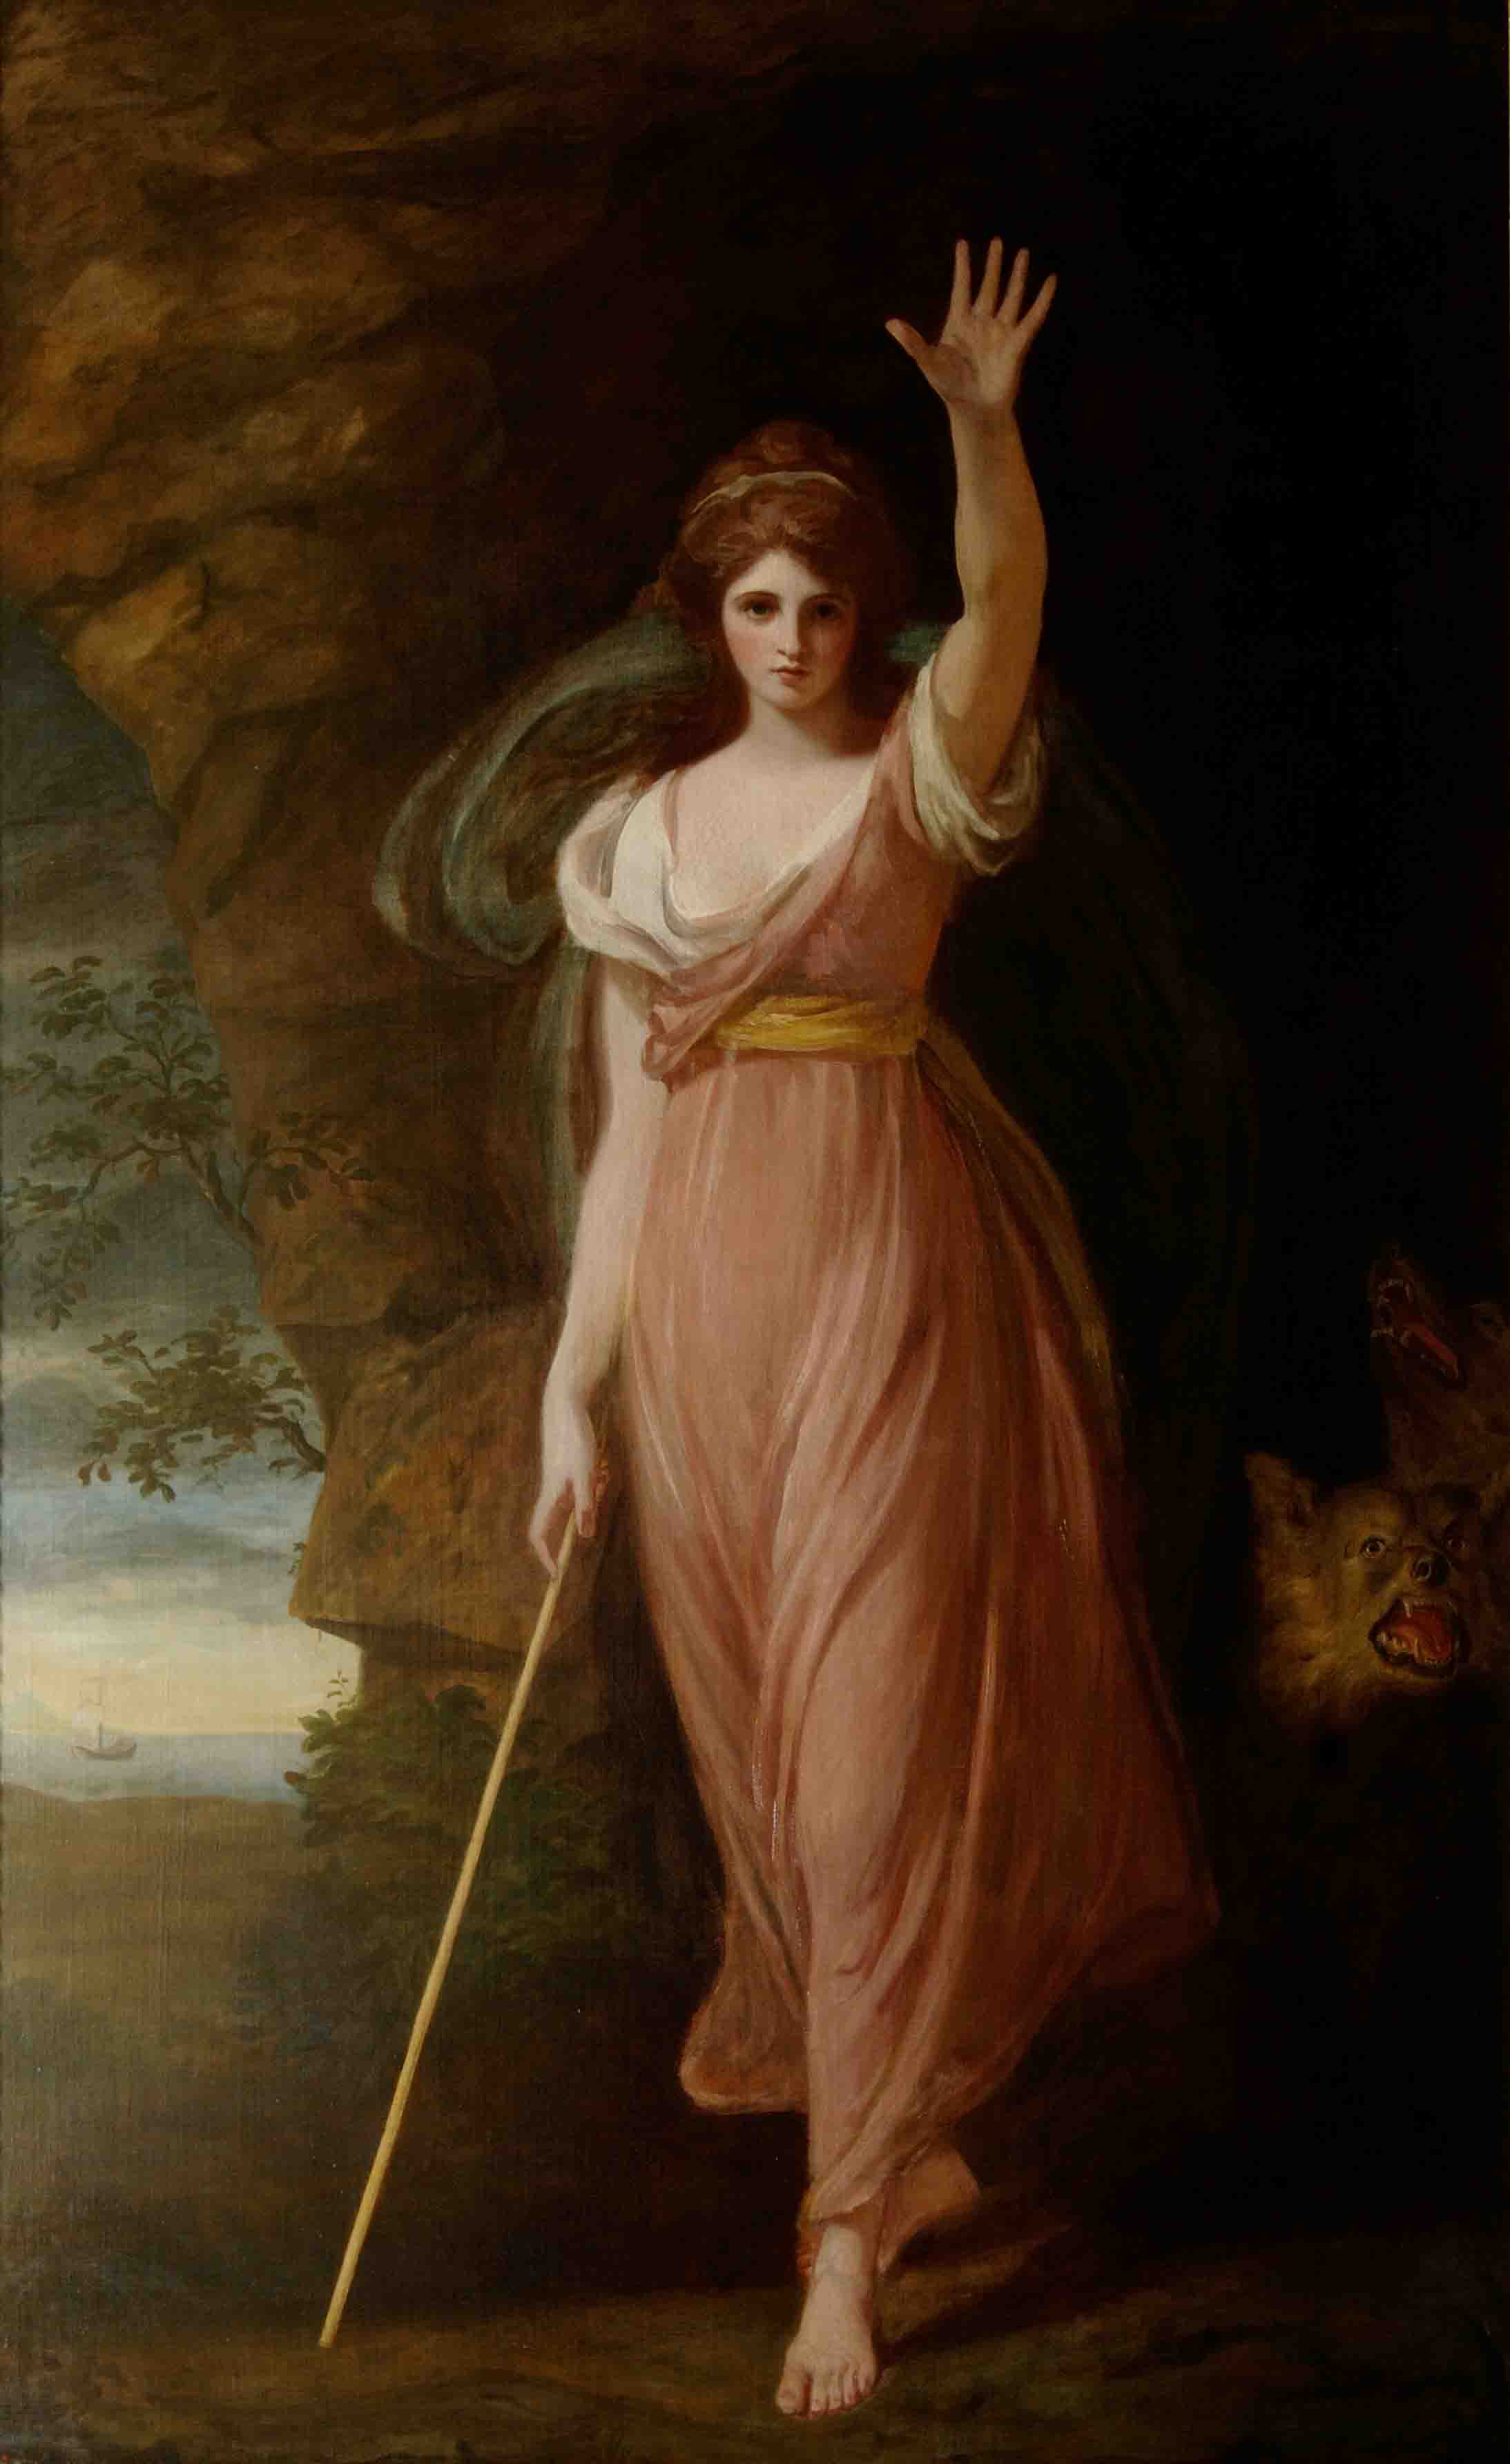 Emma as Circe, 1782, by George Romney © The National Trust, Waddesdon Manor